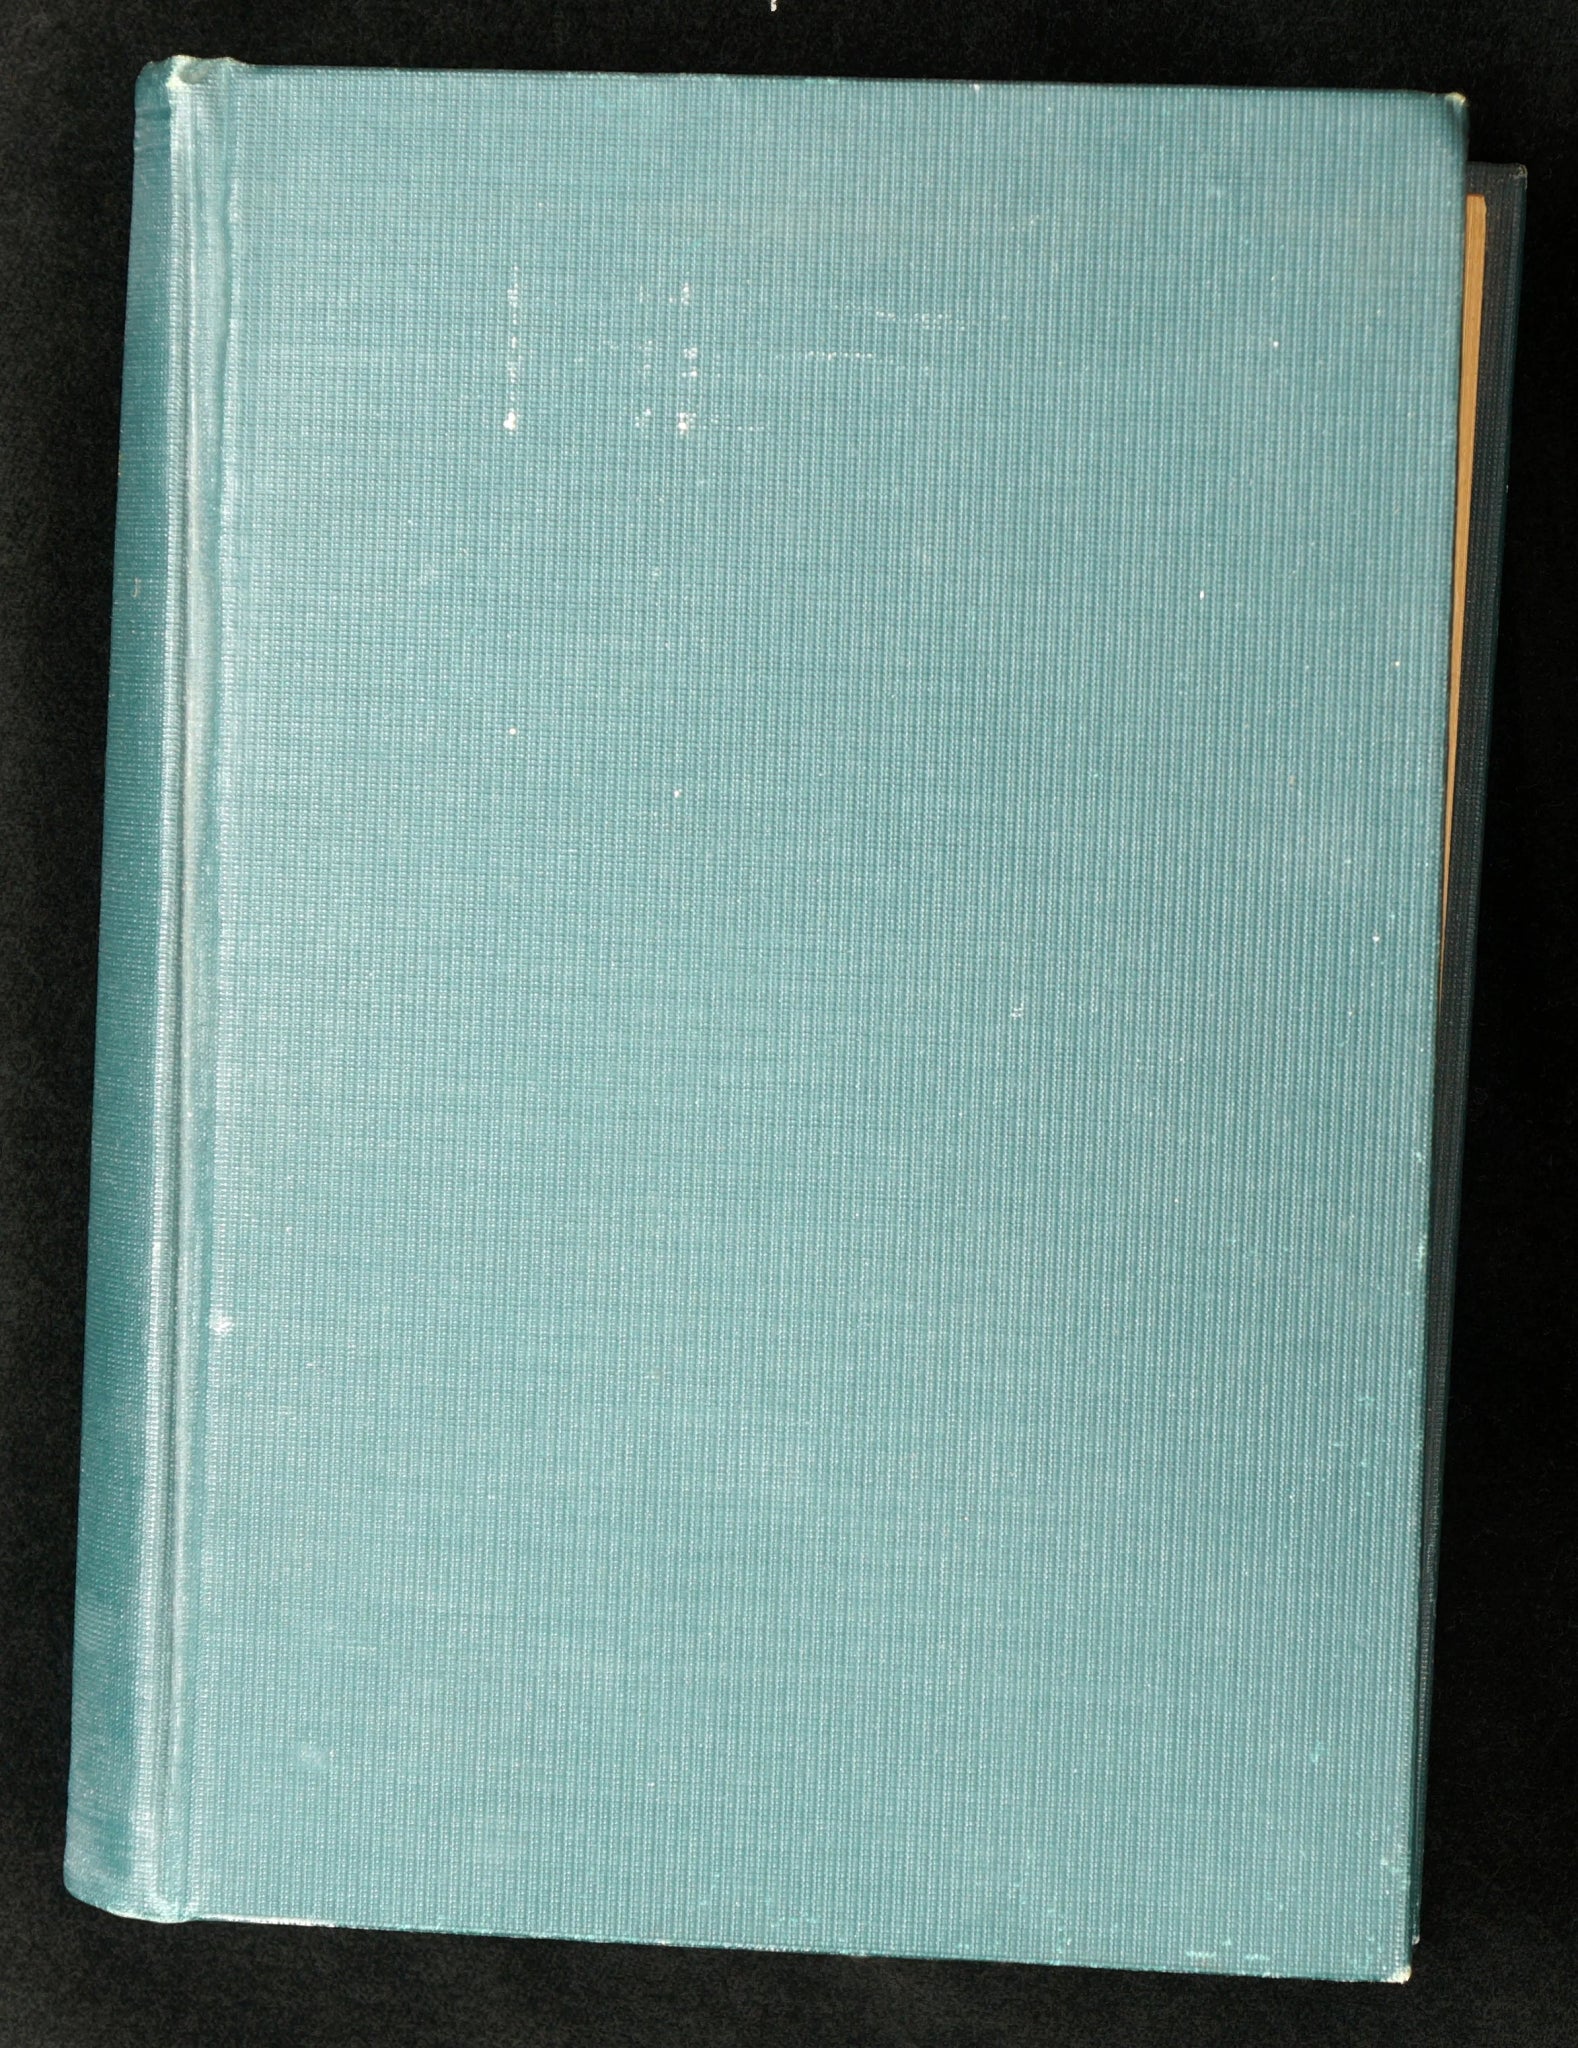 The Later History of the First Church of Christ, New London, Conn 1900 , Blake, Rev. S. Leroy - Bear and Raven Antiques